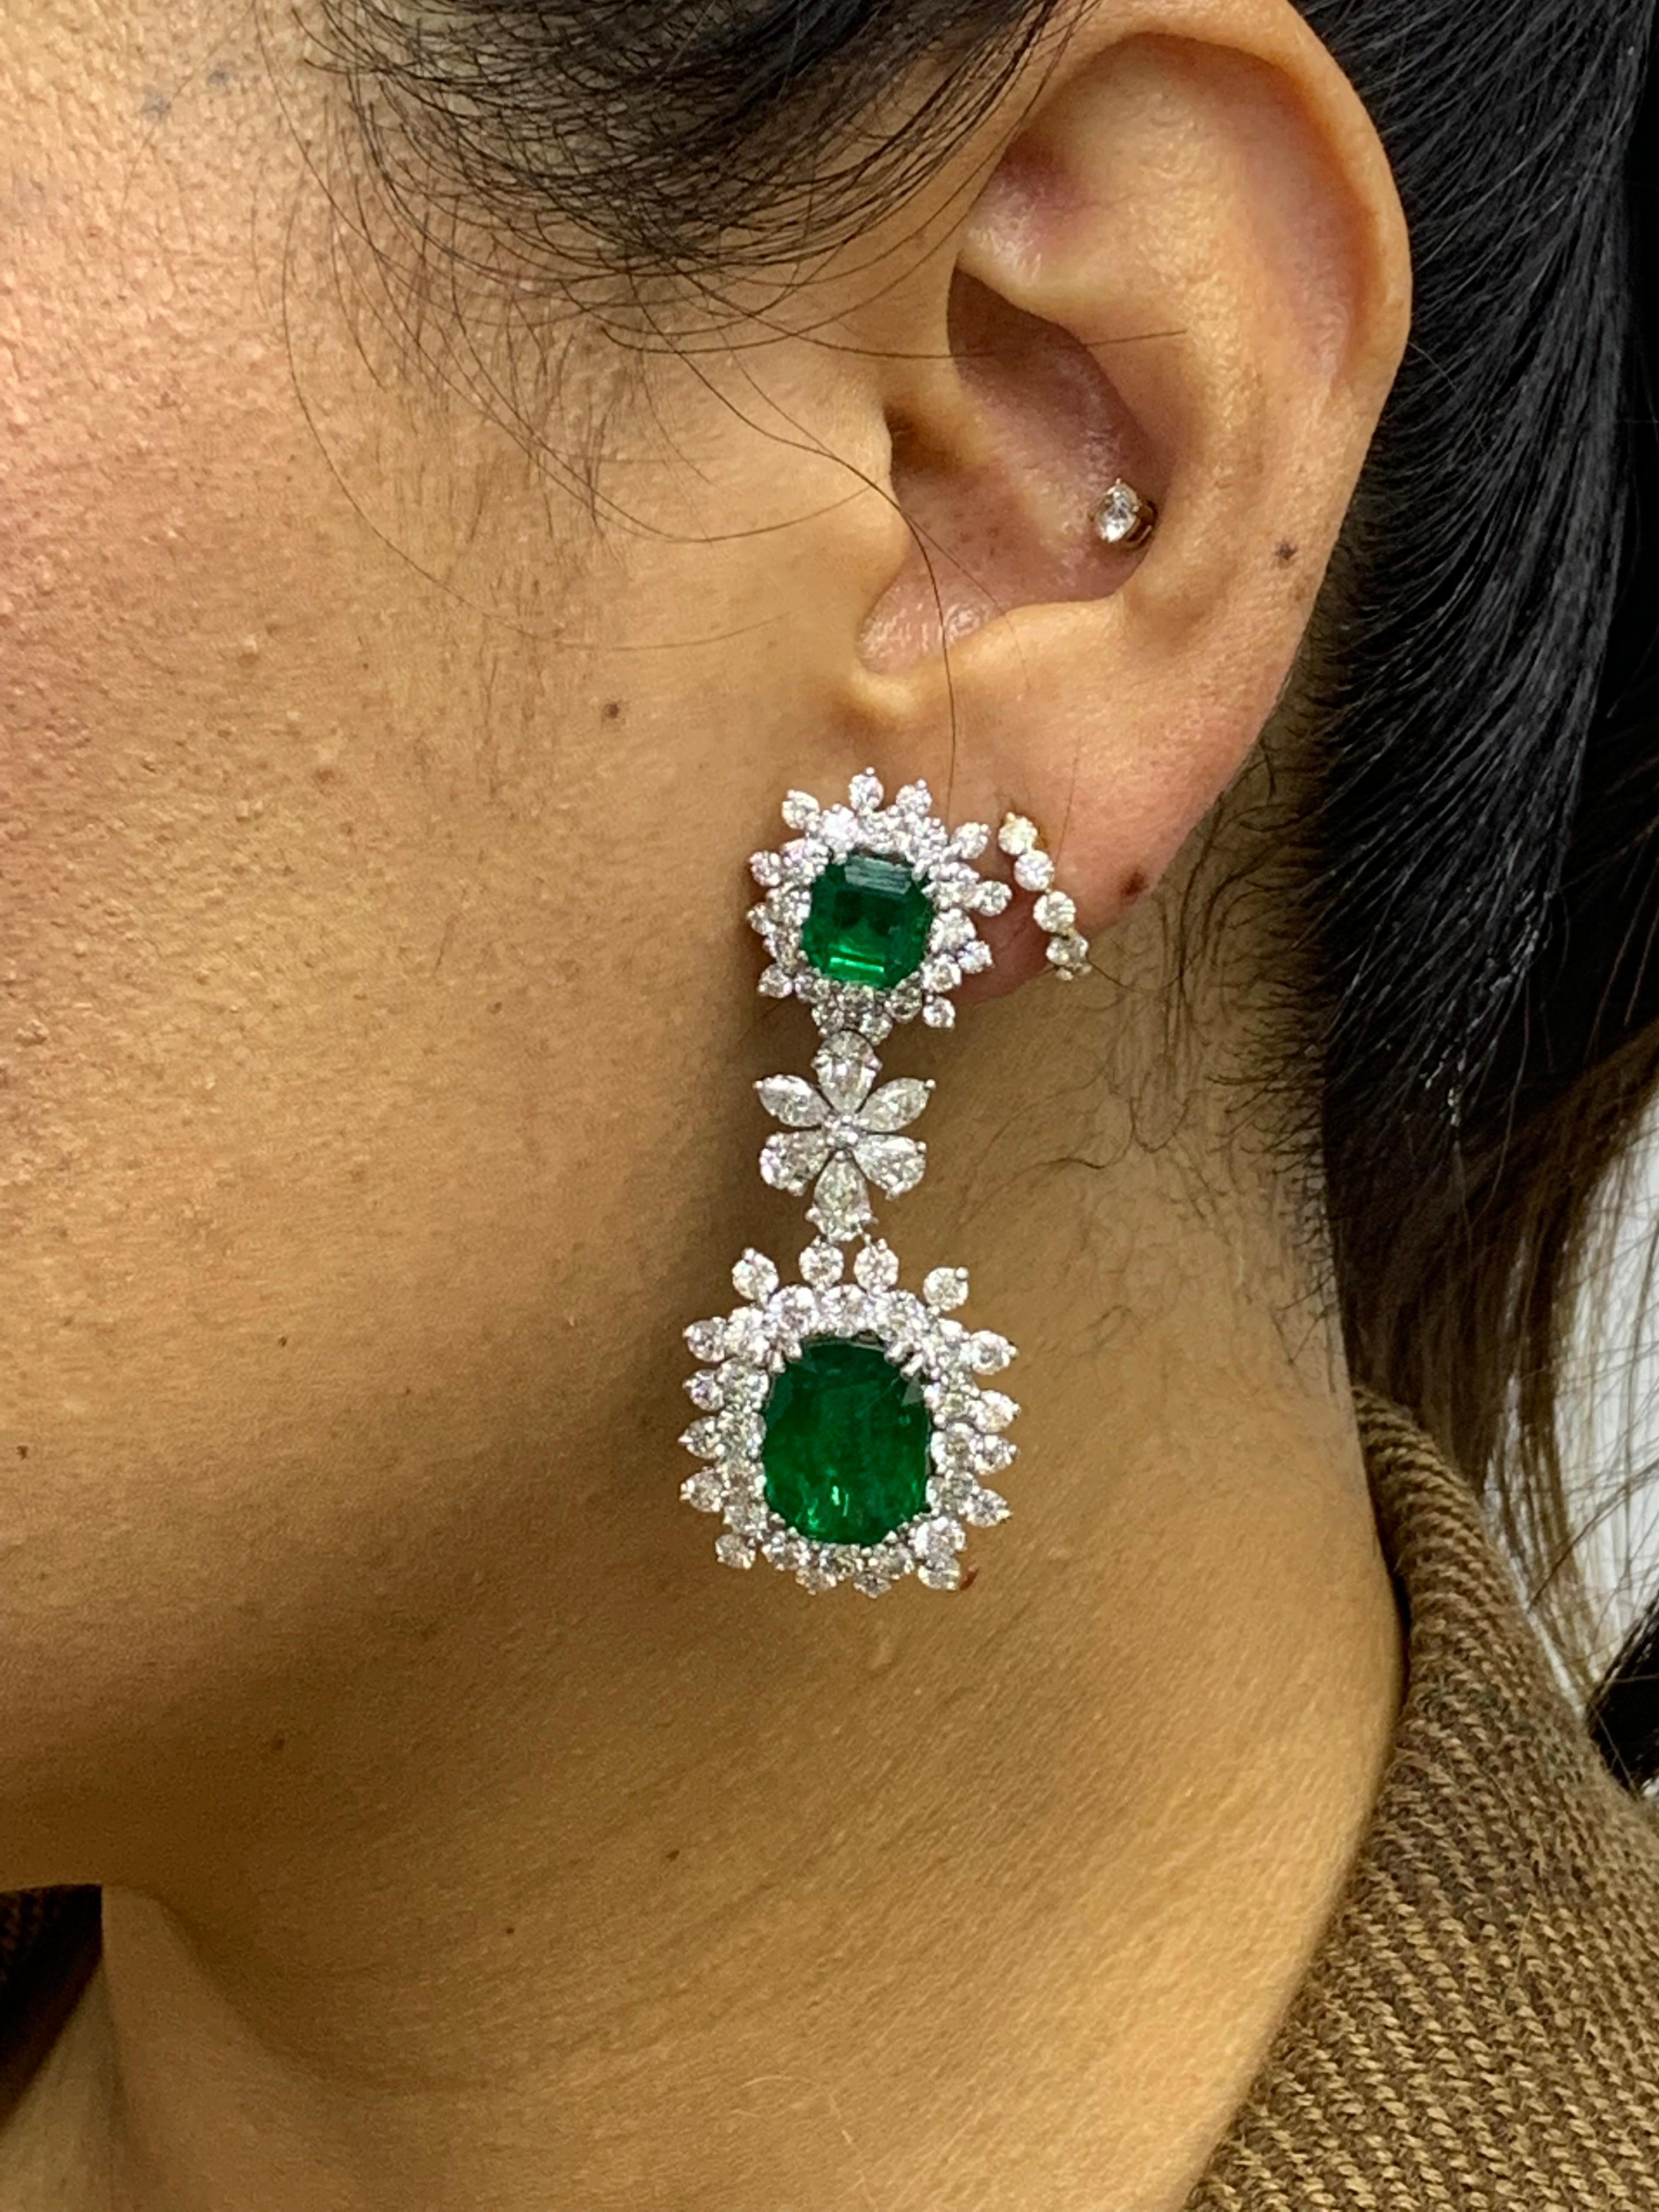 Burst out in style with this gorgeous pair of 18k white gold earrings. Showcases 4 fancy emerald cut emeralds weighing 15.67 carats surrounded by sparkling round diamonds in a creative floral motif. Suspended on vibrant radiant cut emeralds